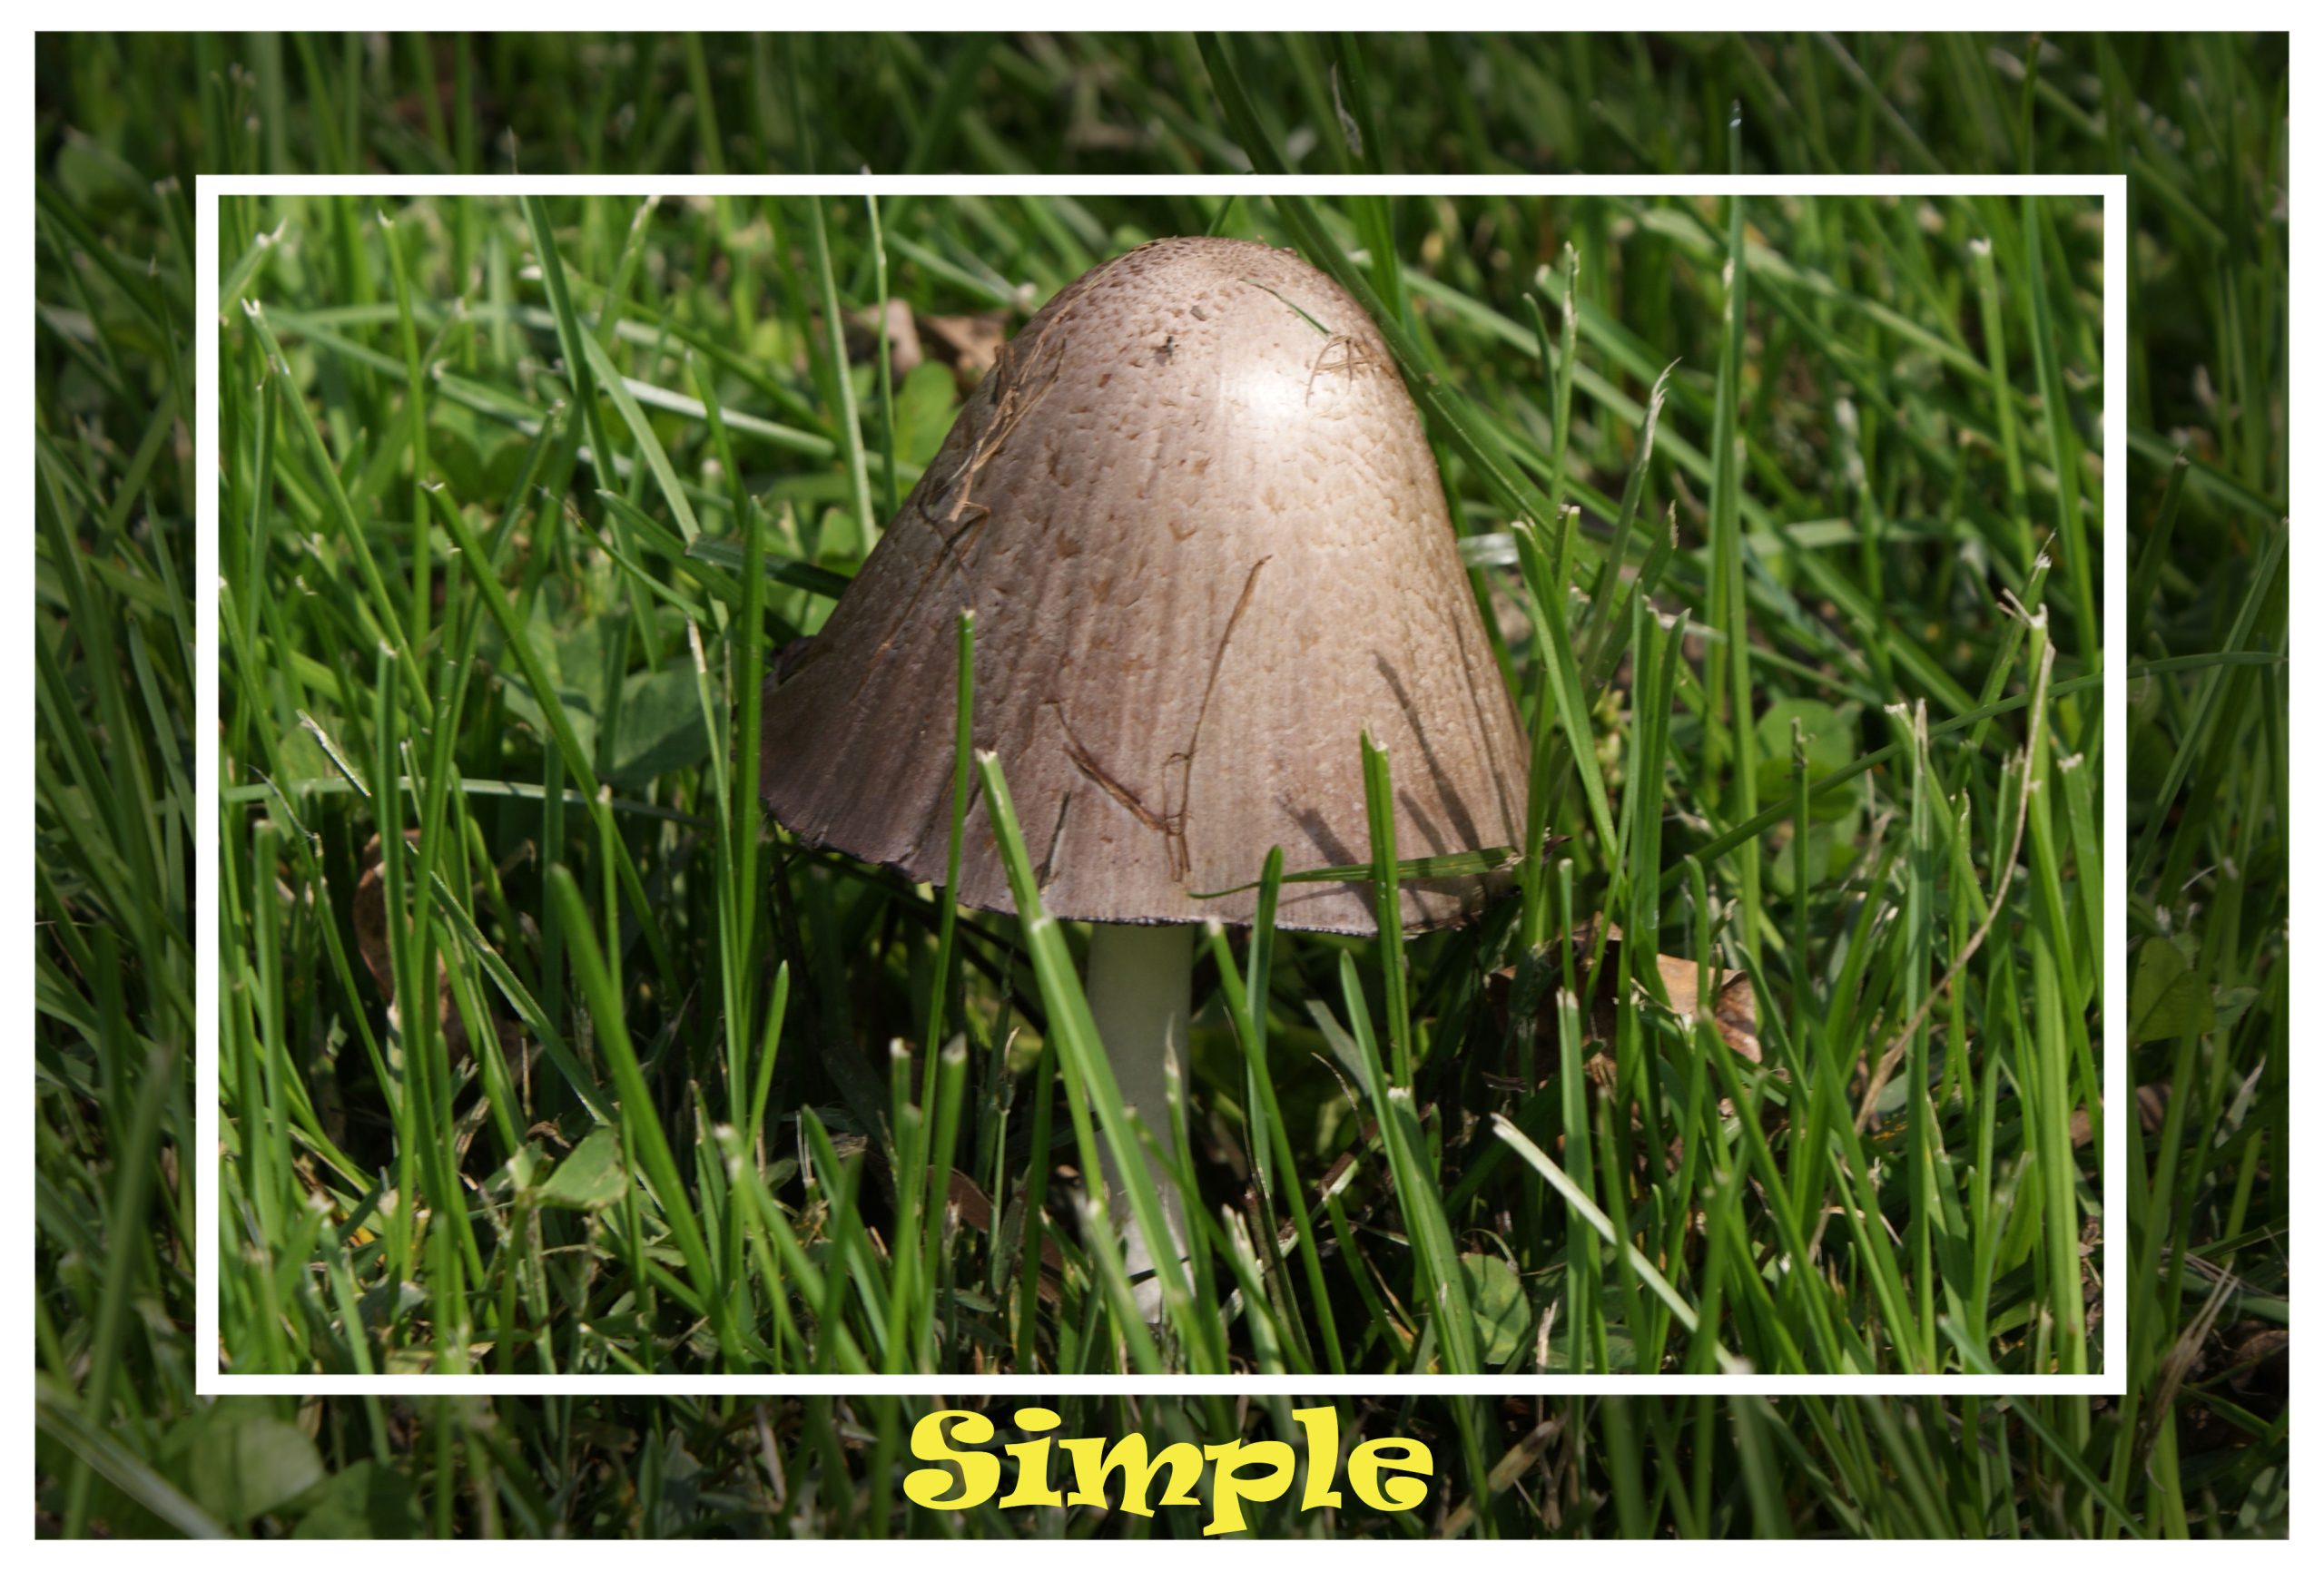 Simple Mushrooms (user submitted)